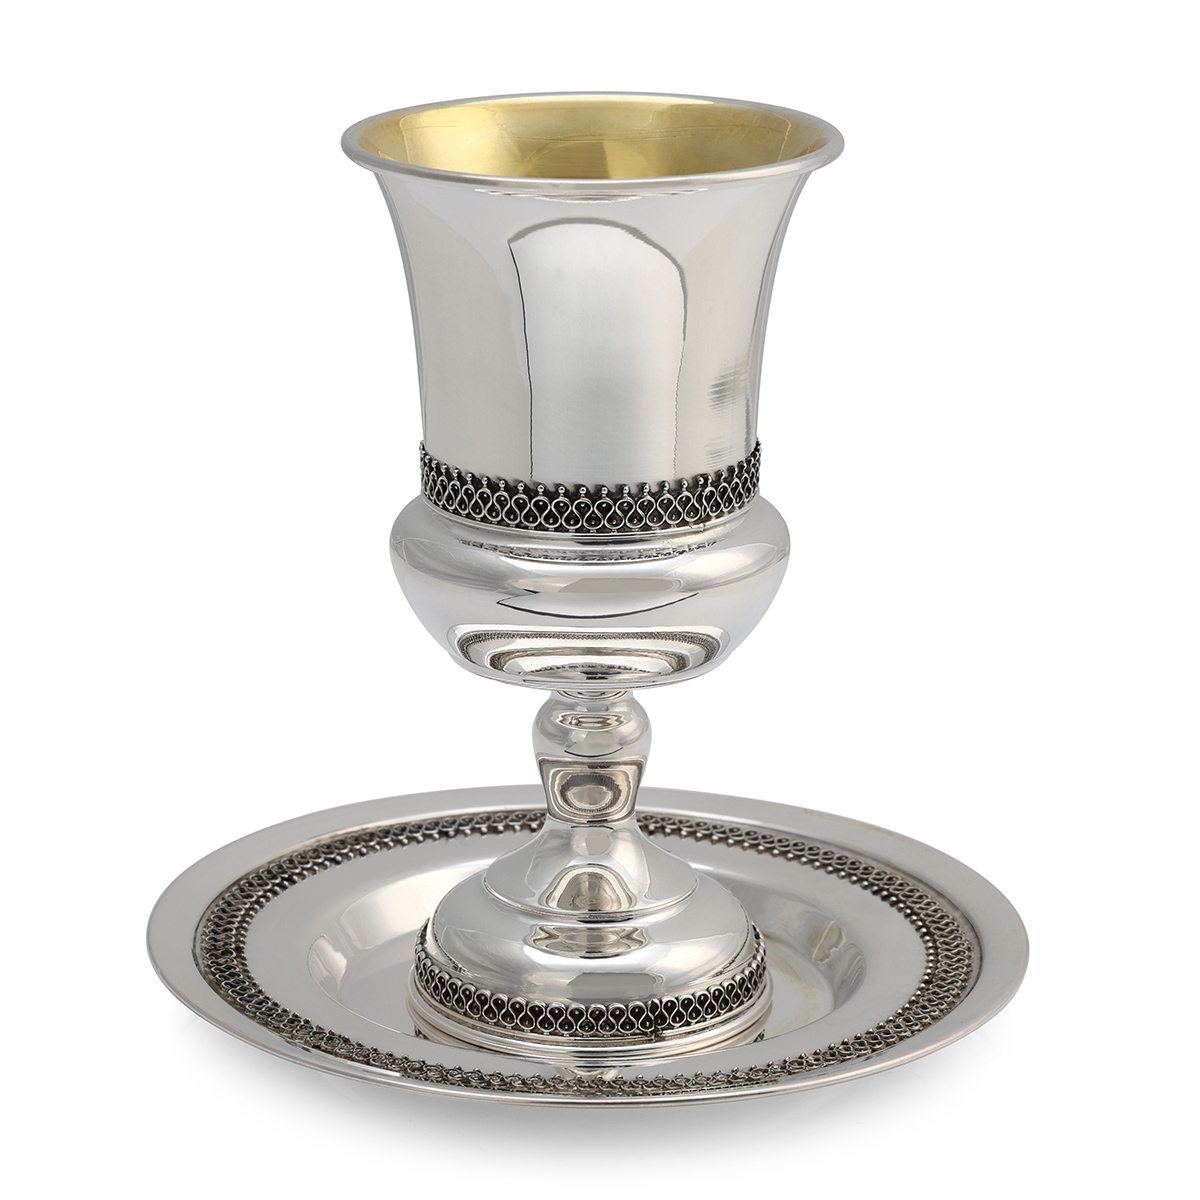 Handcrafted Stemmed Sterling Silver Kiddush Cup with Filigree Design - 1